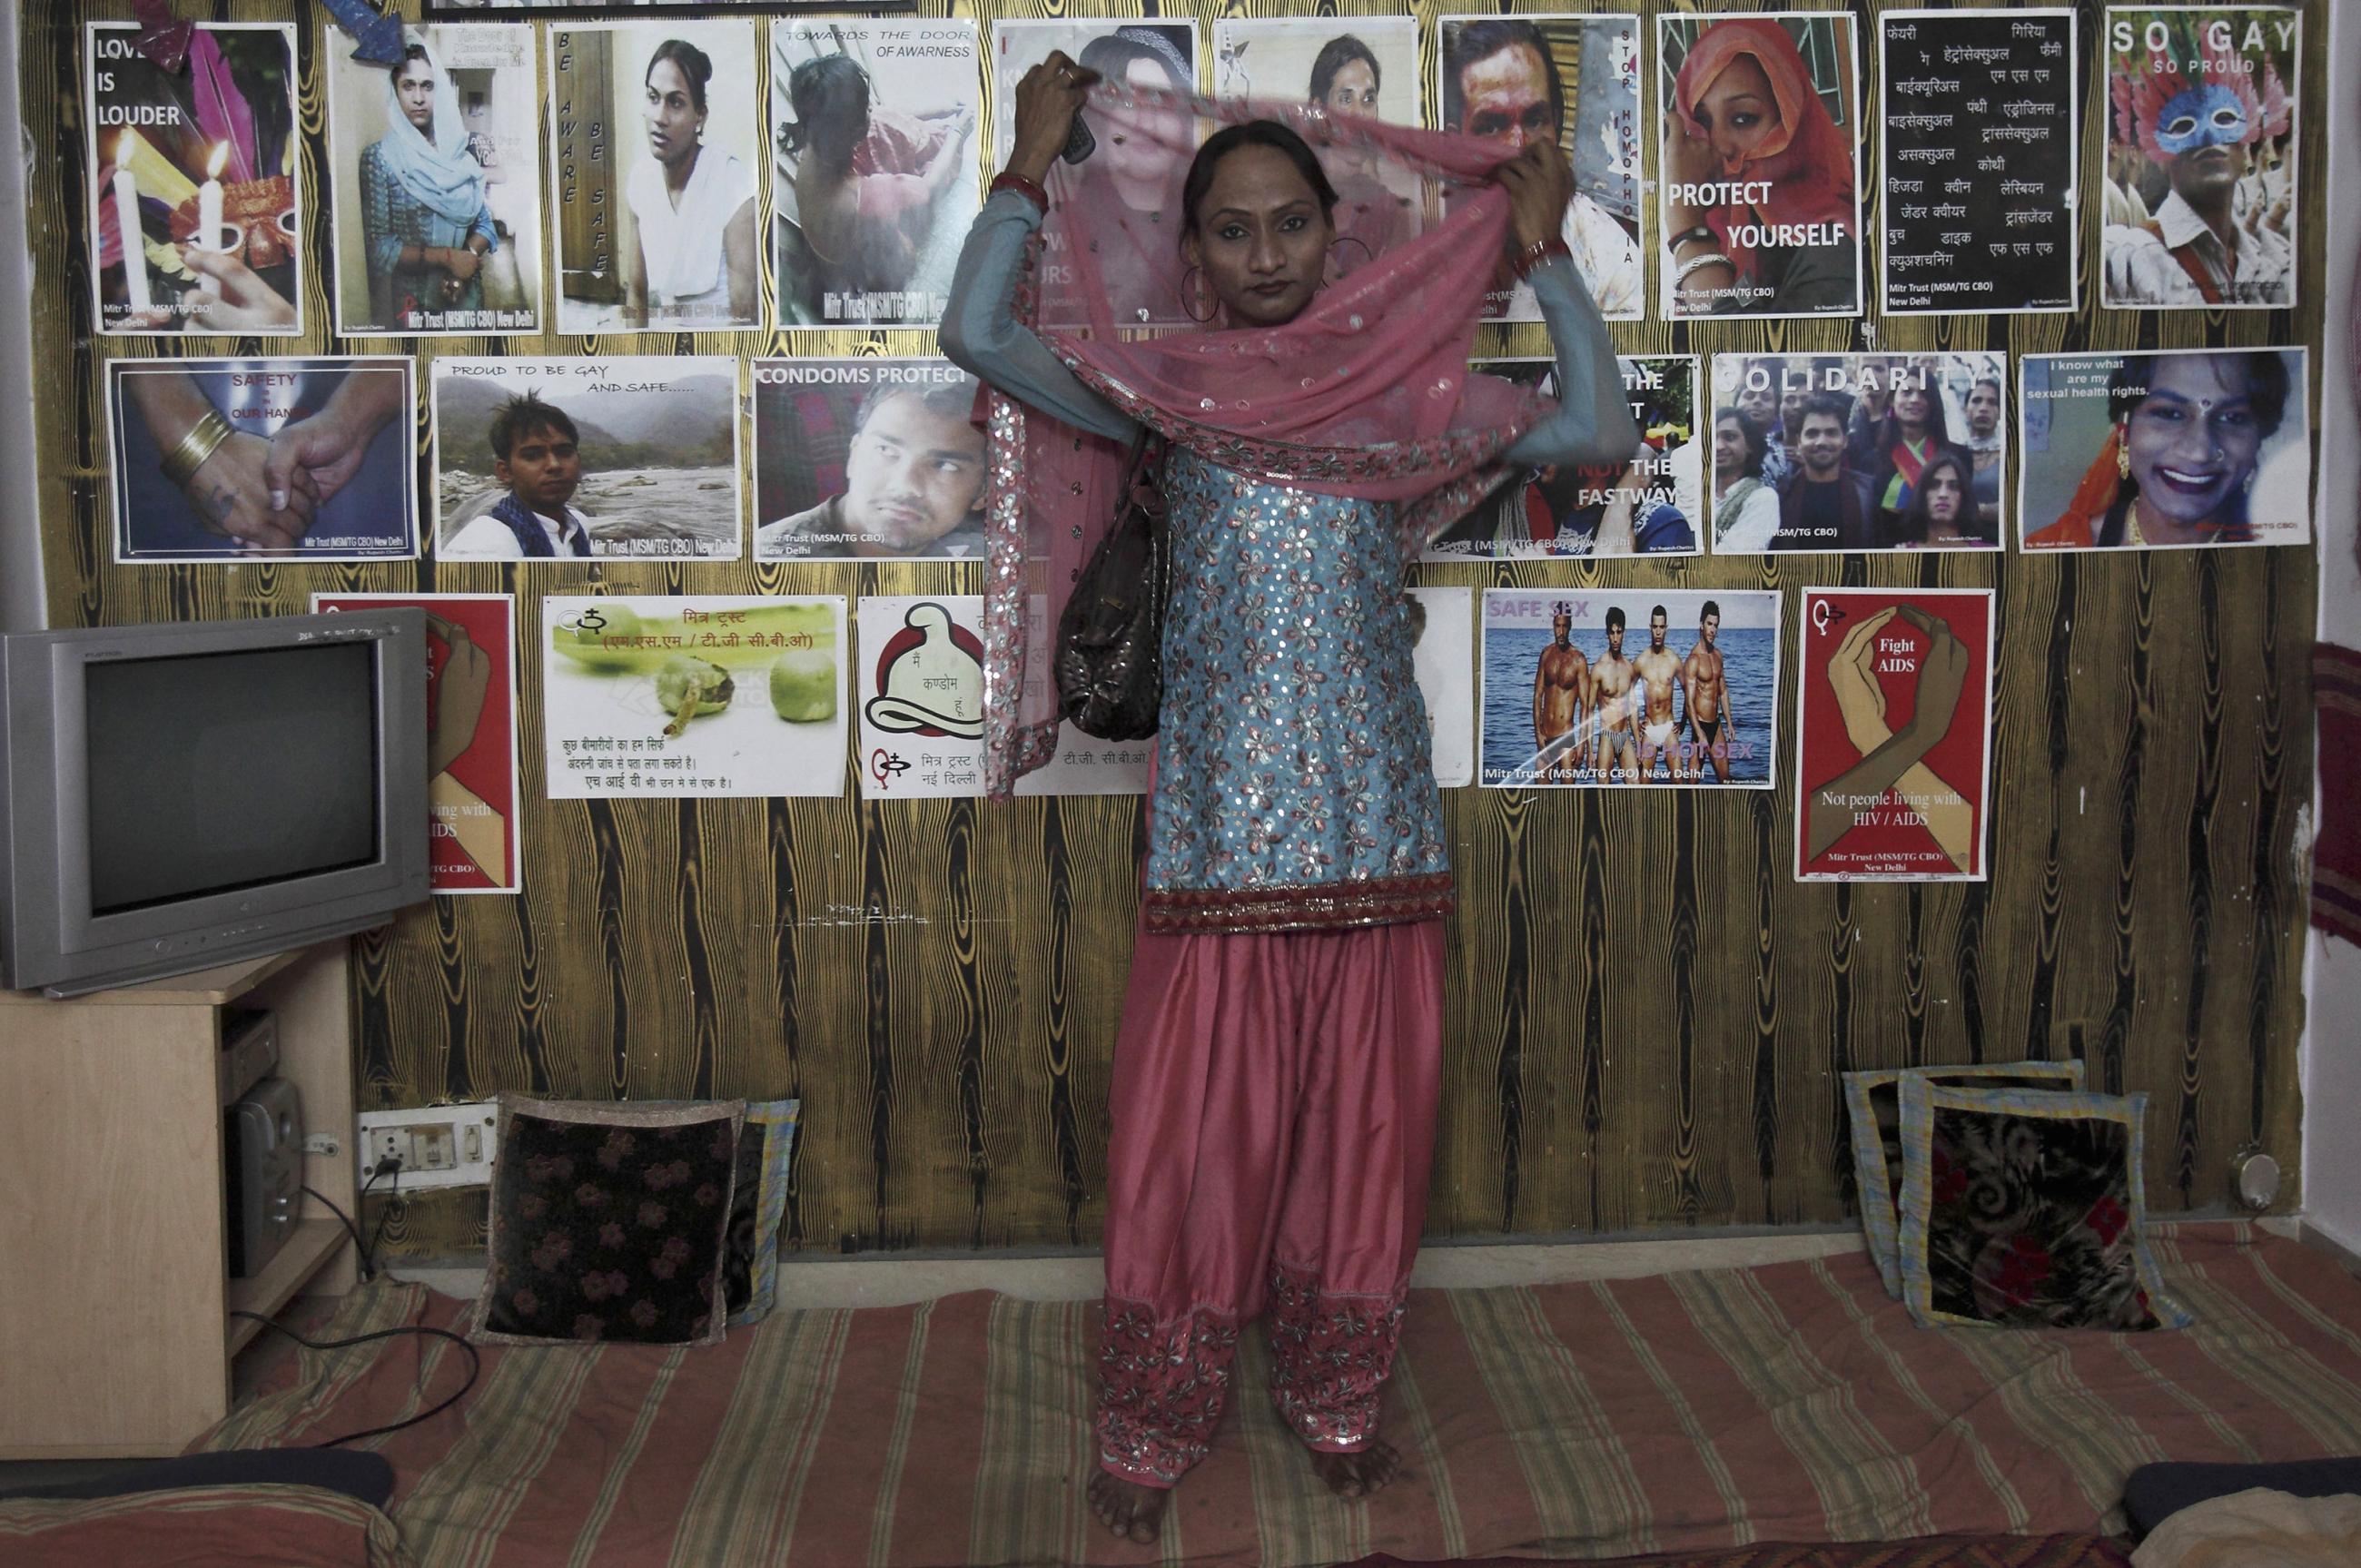 Seema, thirty-three, poses inside a local nongovernmental organization office, which supports sexual minorities, in New Delhi, May 14, 2012.